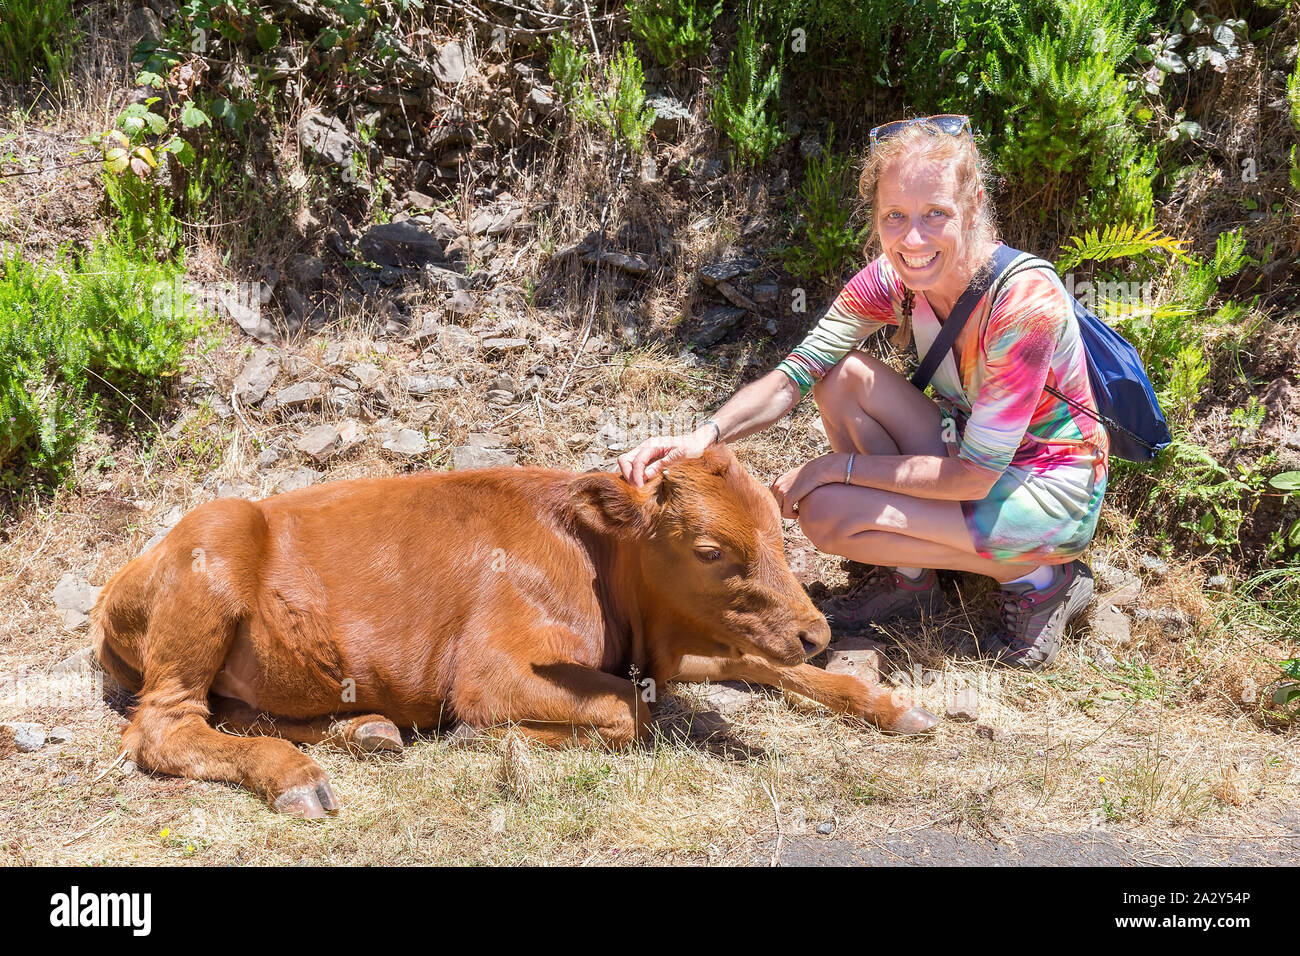 Caucasian woman strokes brown calf in the verge Stock Photo